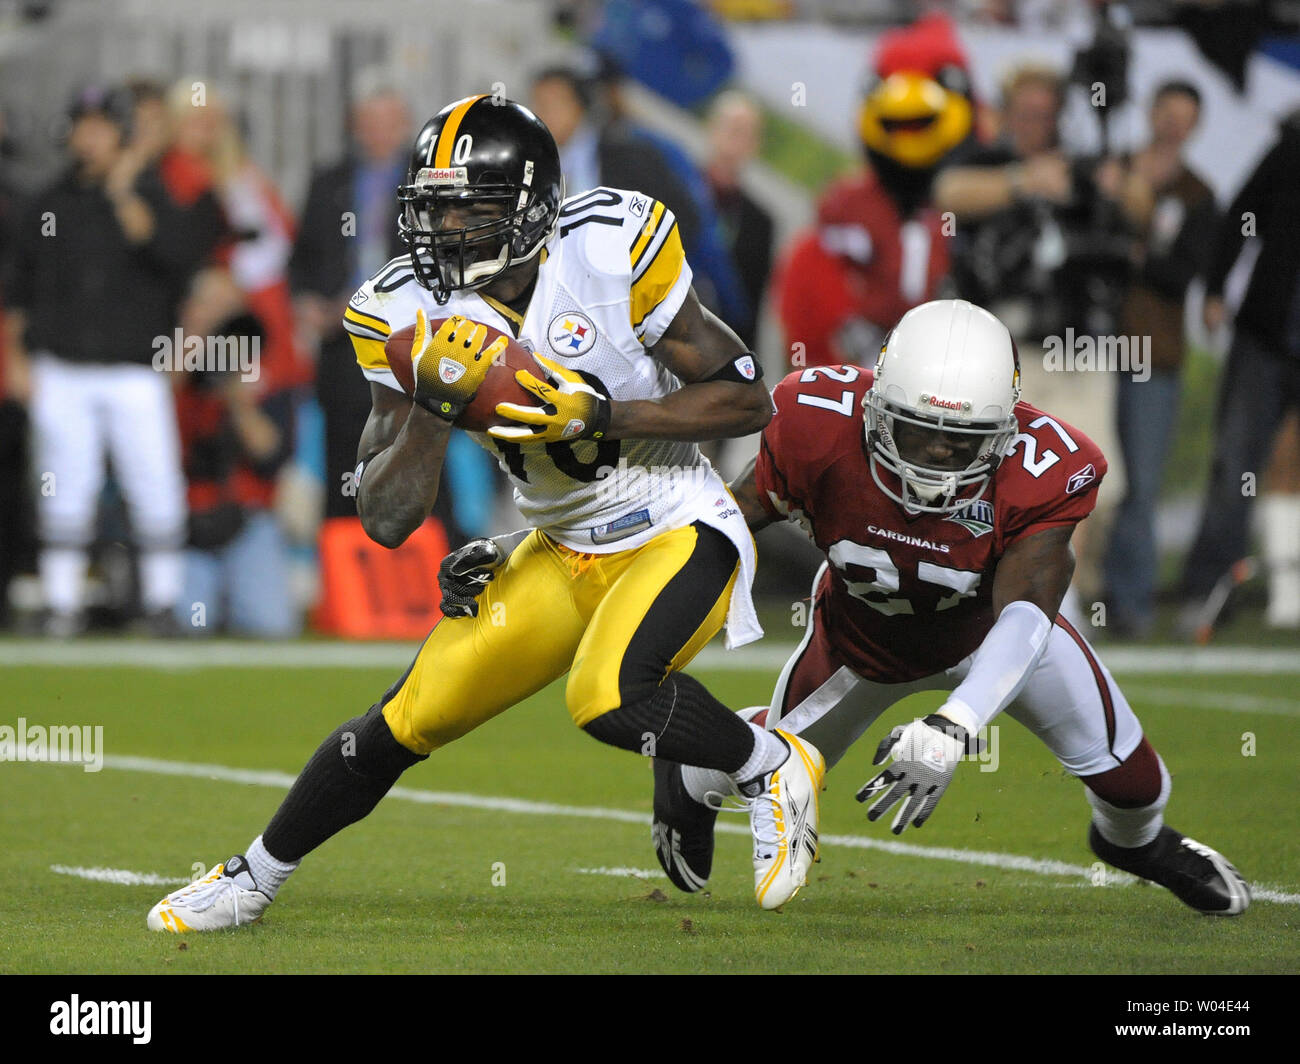 Pittsburgh Steelers Santonio Holmes returns a punt for one yard against Arizona Cardinals defender Michael Adams in the second quarter at Super Bowl XLIII at Raymond James Stadium in Tampa, Florida, on February 1, 2009. (UPI Photo/Kevin Dietsch) Stock Photo